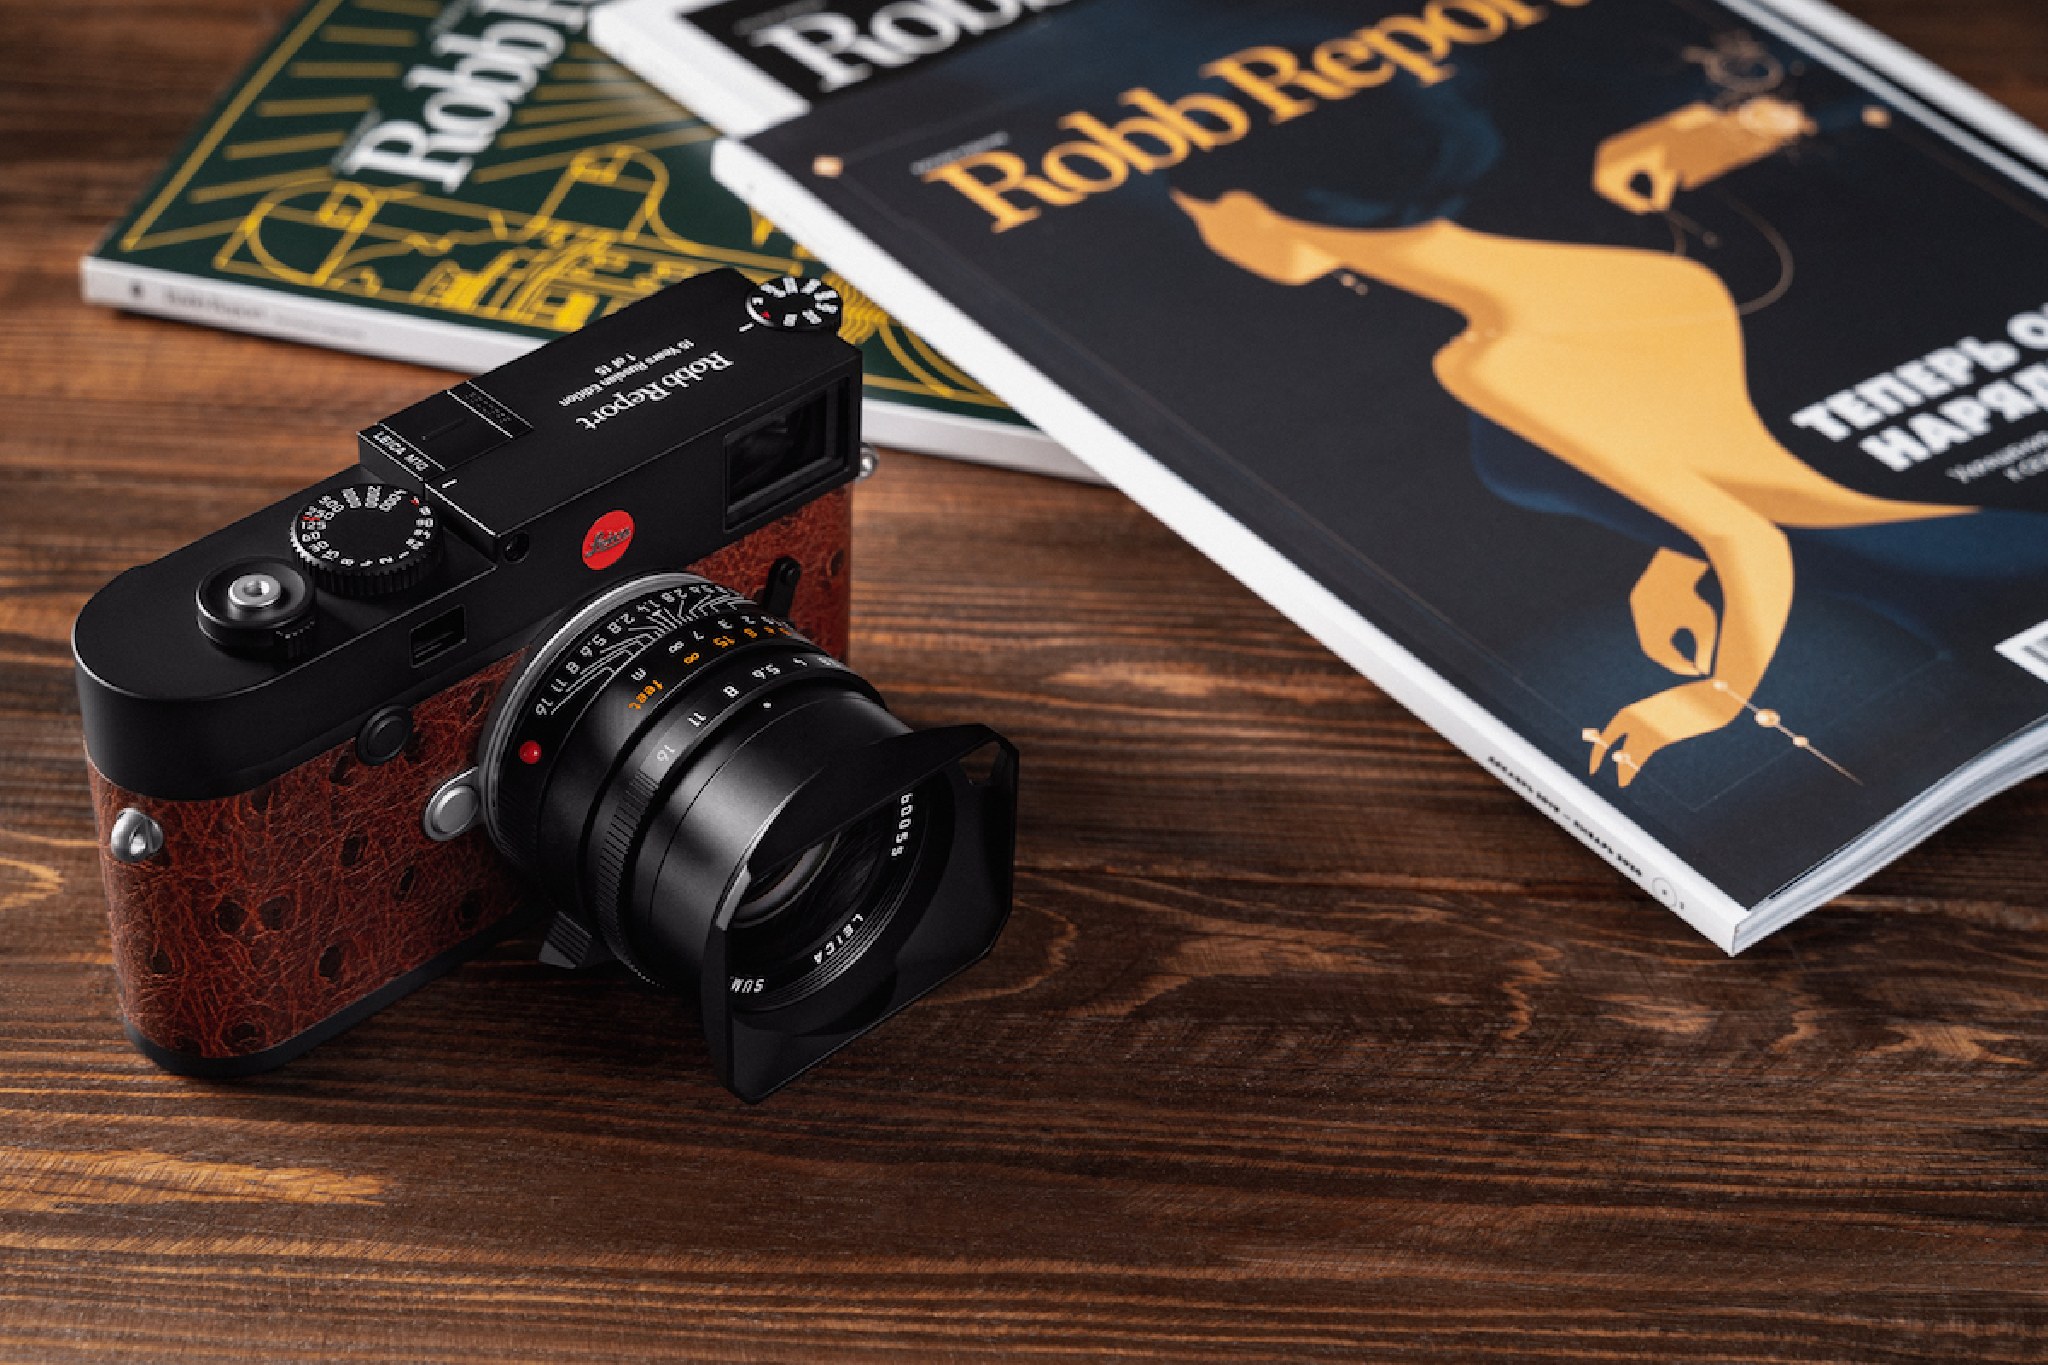 Leica-M10-Robb-Report-Russia-15-years-limited-edition-camera-1.jpg